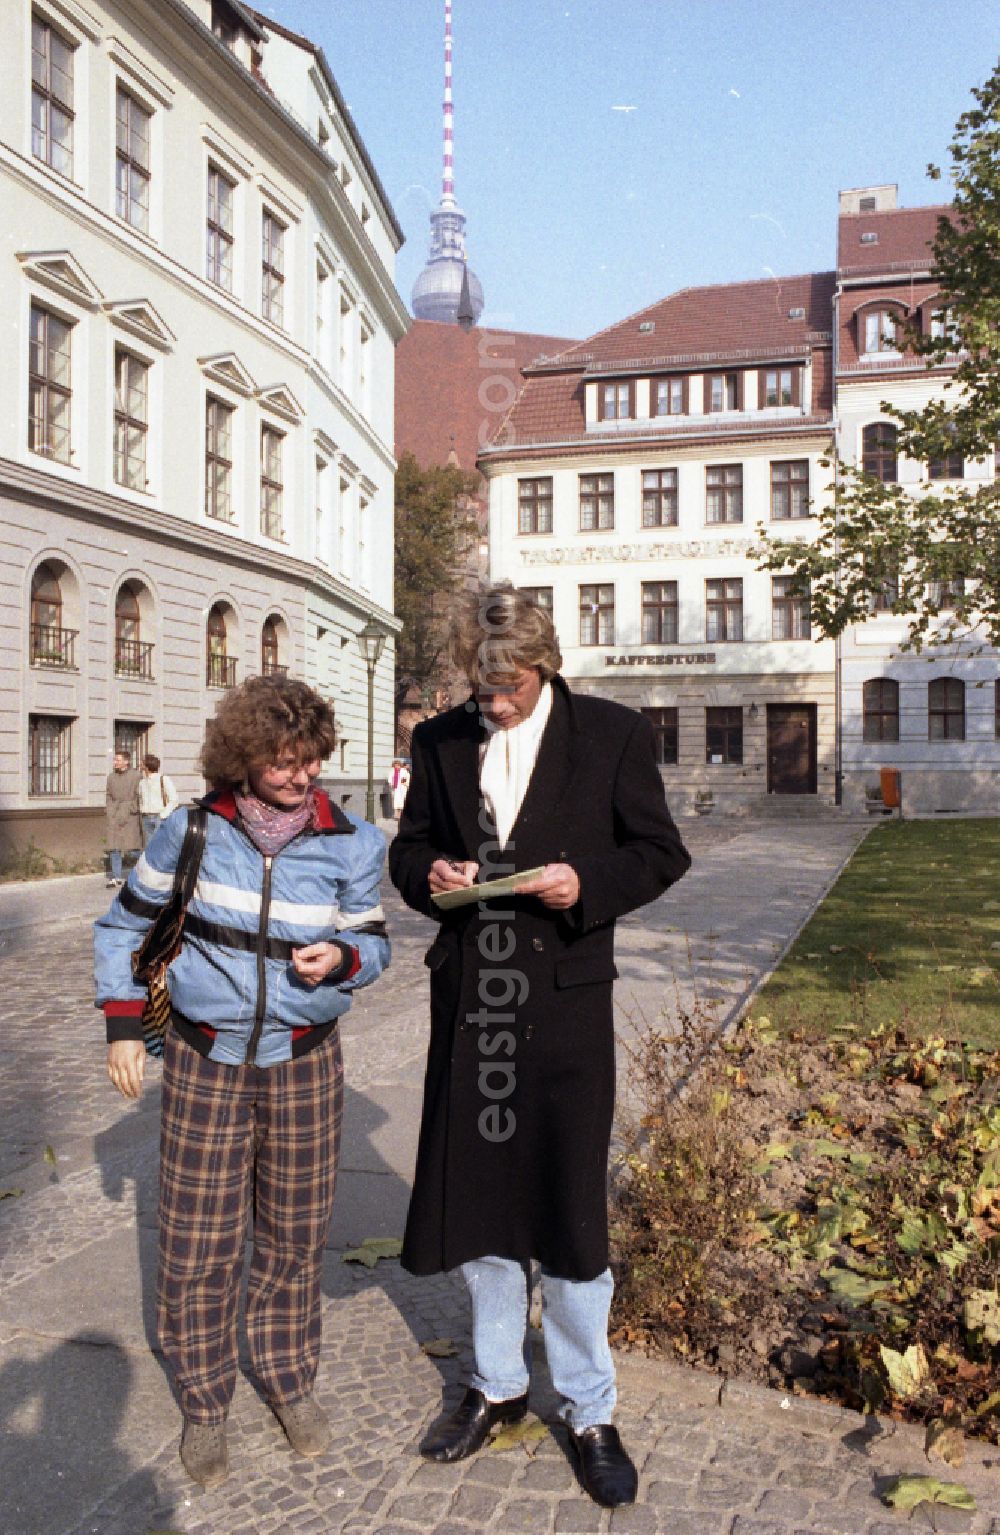 GDR photo archive: Berlin - Portrait shot of the singer and musician Roland Kaiser distributing autographs in Berlin Eastberlin on the territory of the former GDR, German Democratic Republic